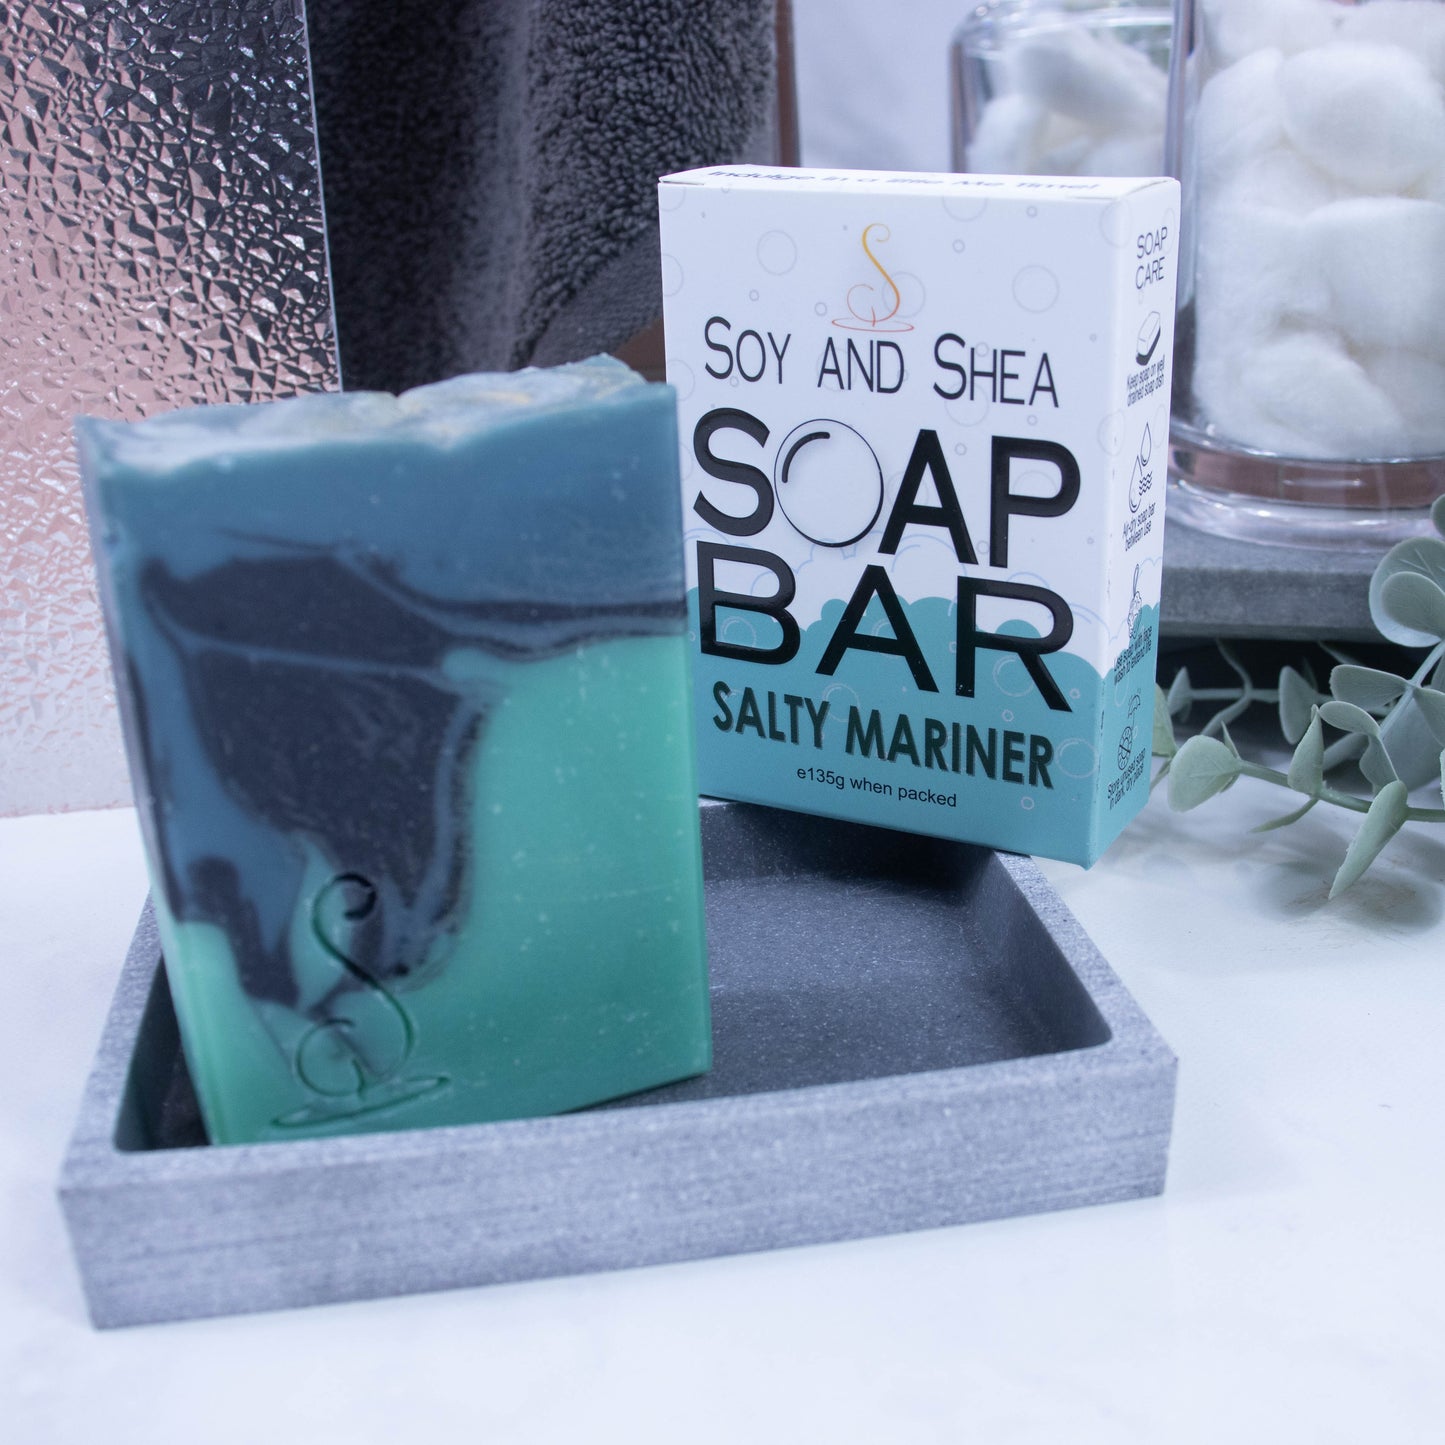 A close up look of the soap which features three layers of colour; a sea green base, black centre and teal at the top, which have been swirled together to look like a rolling wave. The soap is rectangular in shape and is taller than wide. It is sitting on a stone soap dish and behind it is the box the soap came in. The lower portion of the box has a bubble border coloured in sea green whereas the top is white with small grey bubbles. The box advises it is soap and the scent.